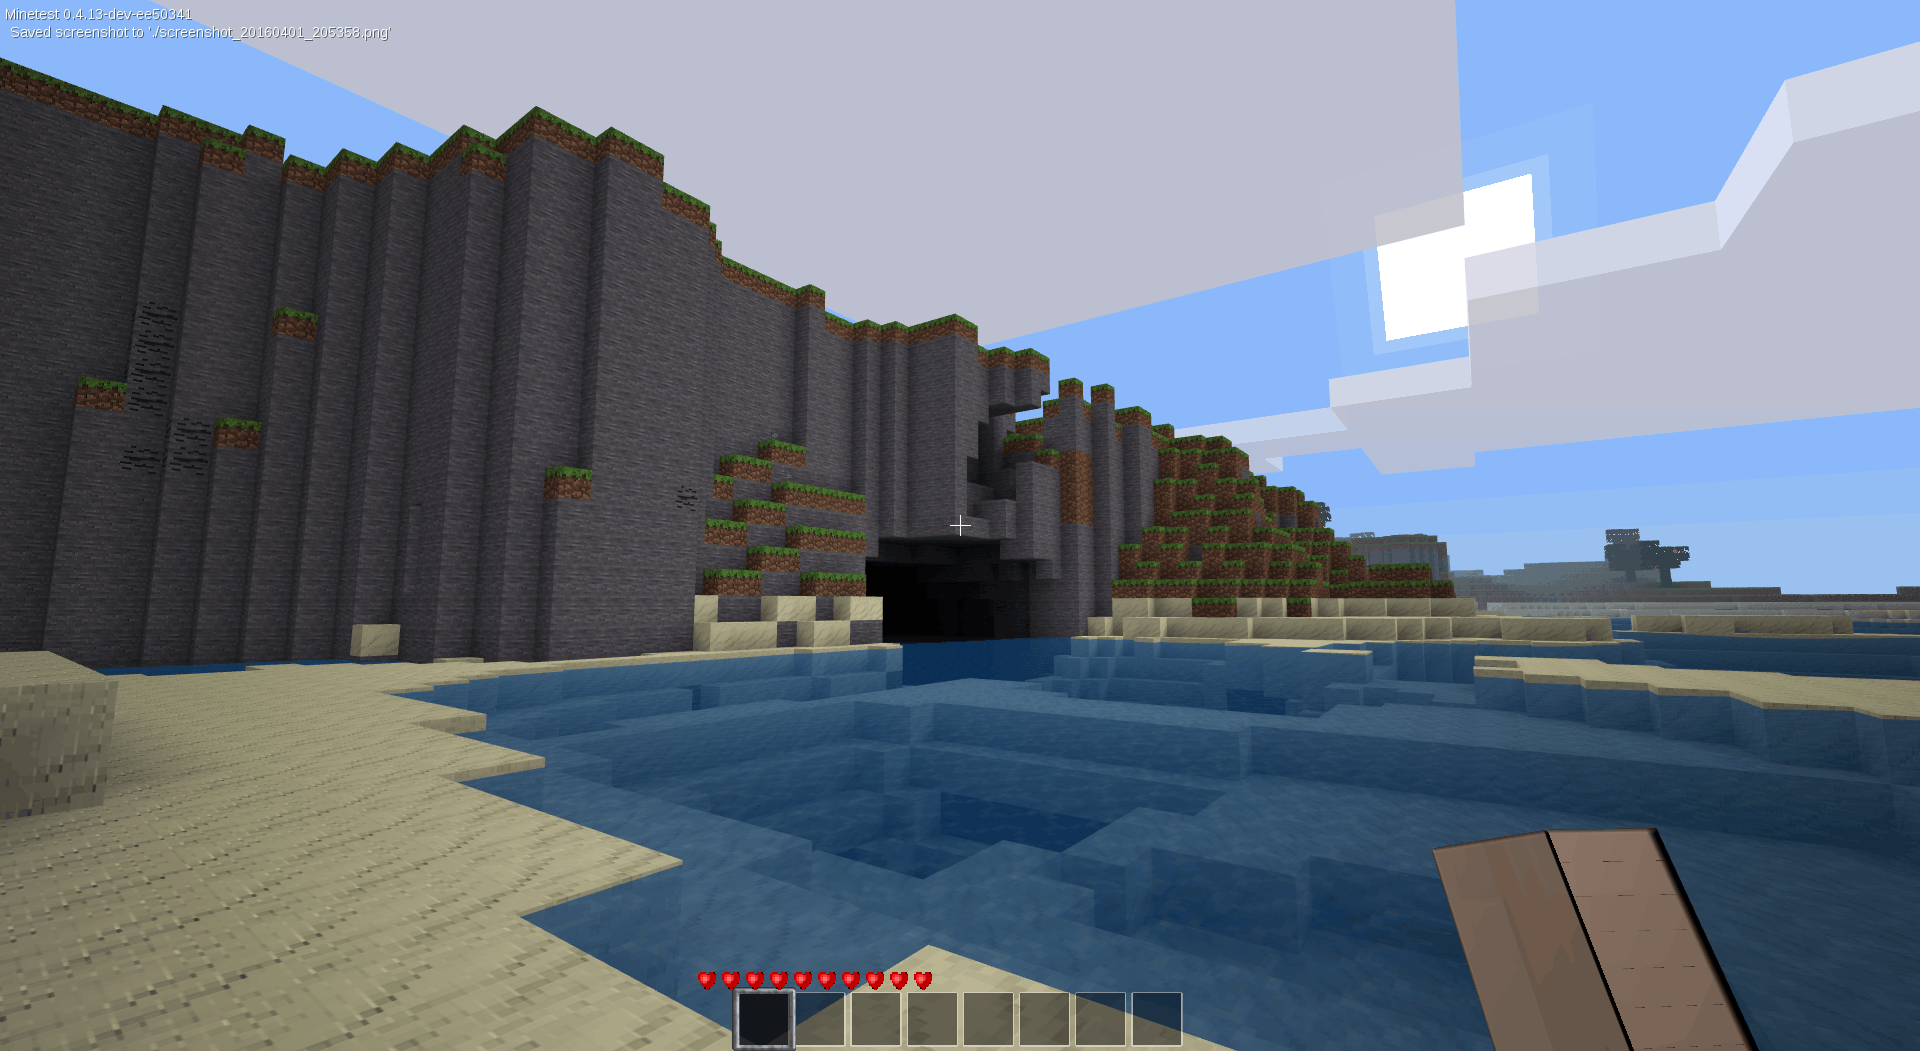 The sun rises over a desert lagoon in Minetest. A whole world of adventure awaits.